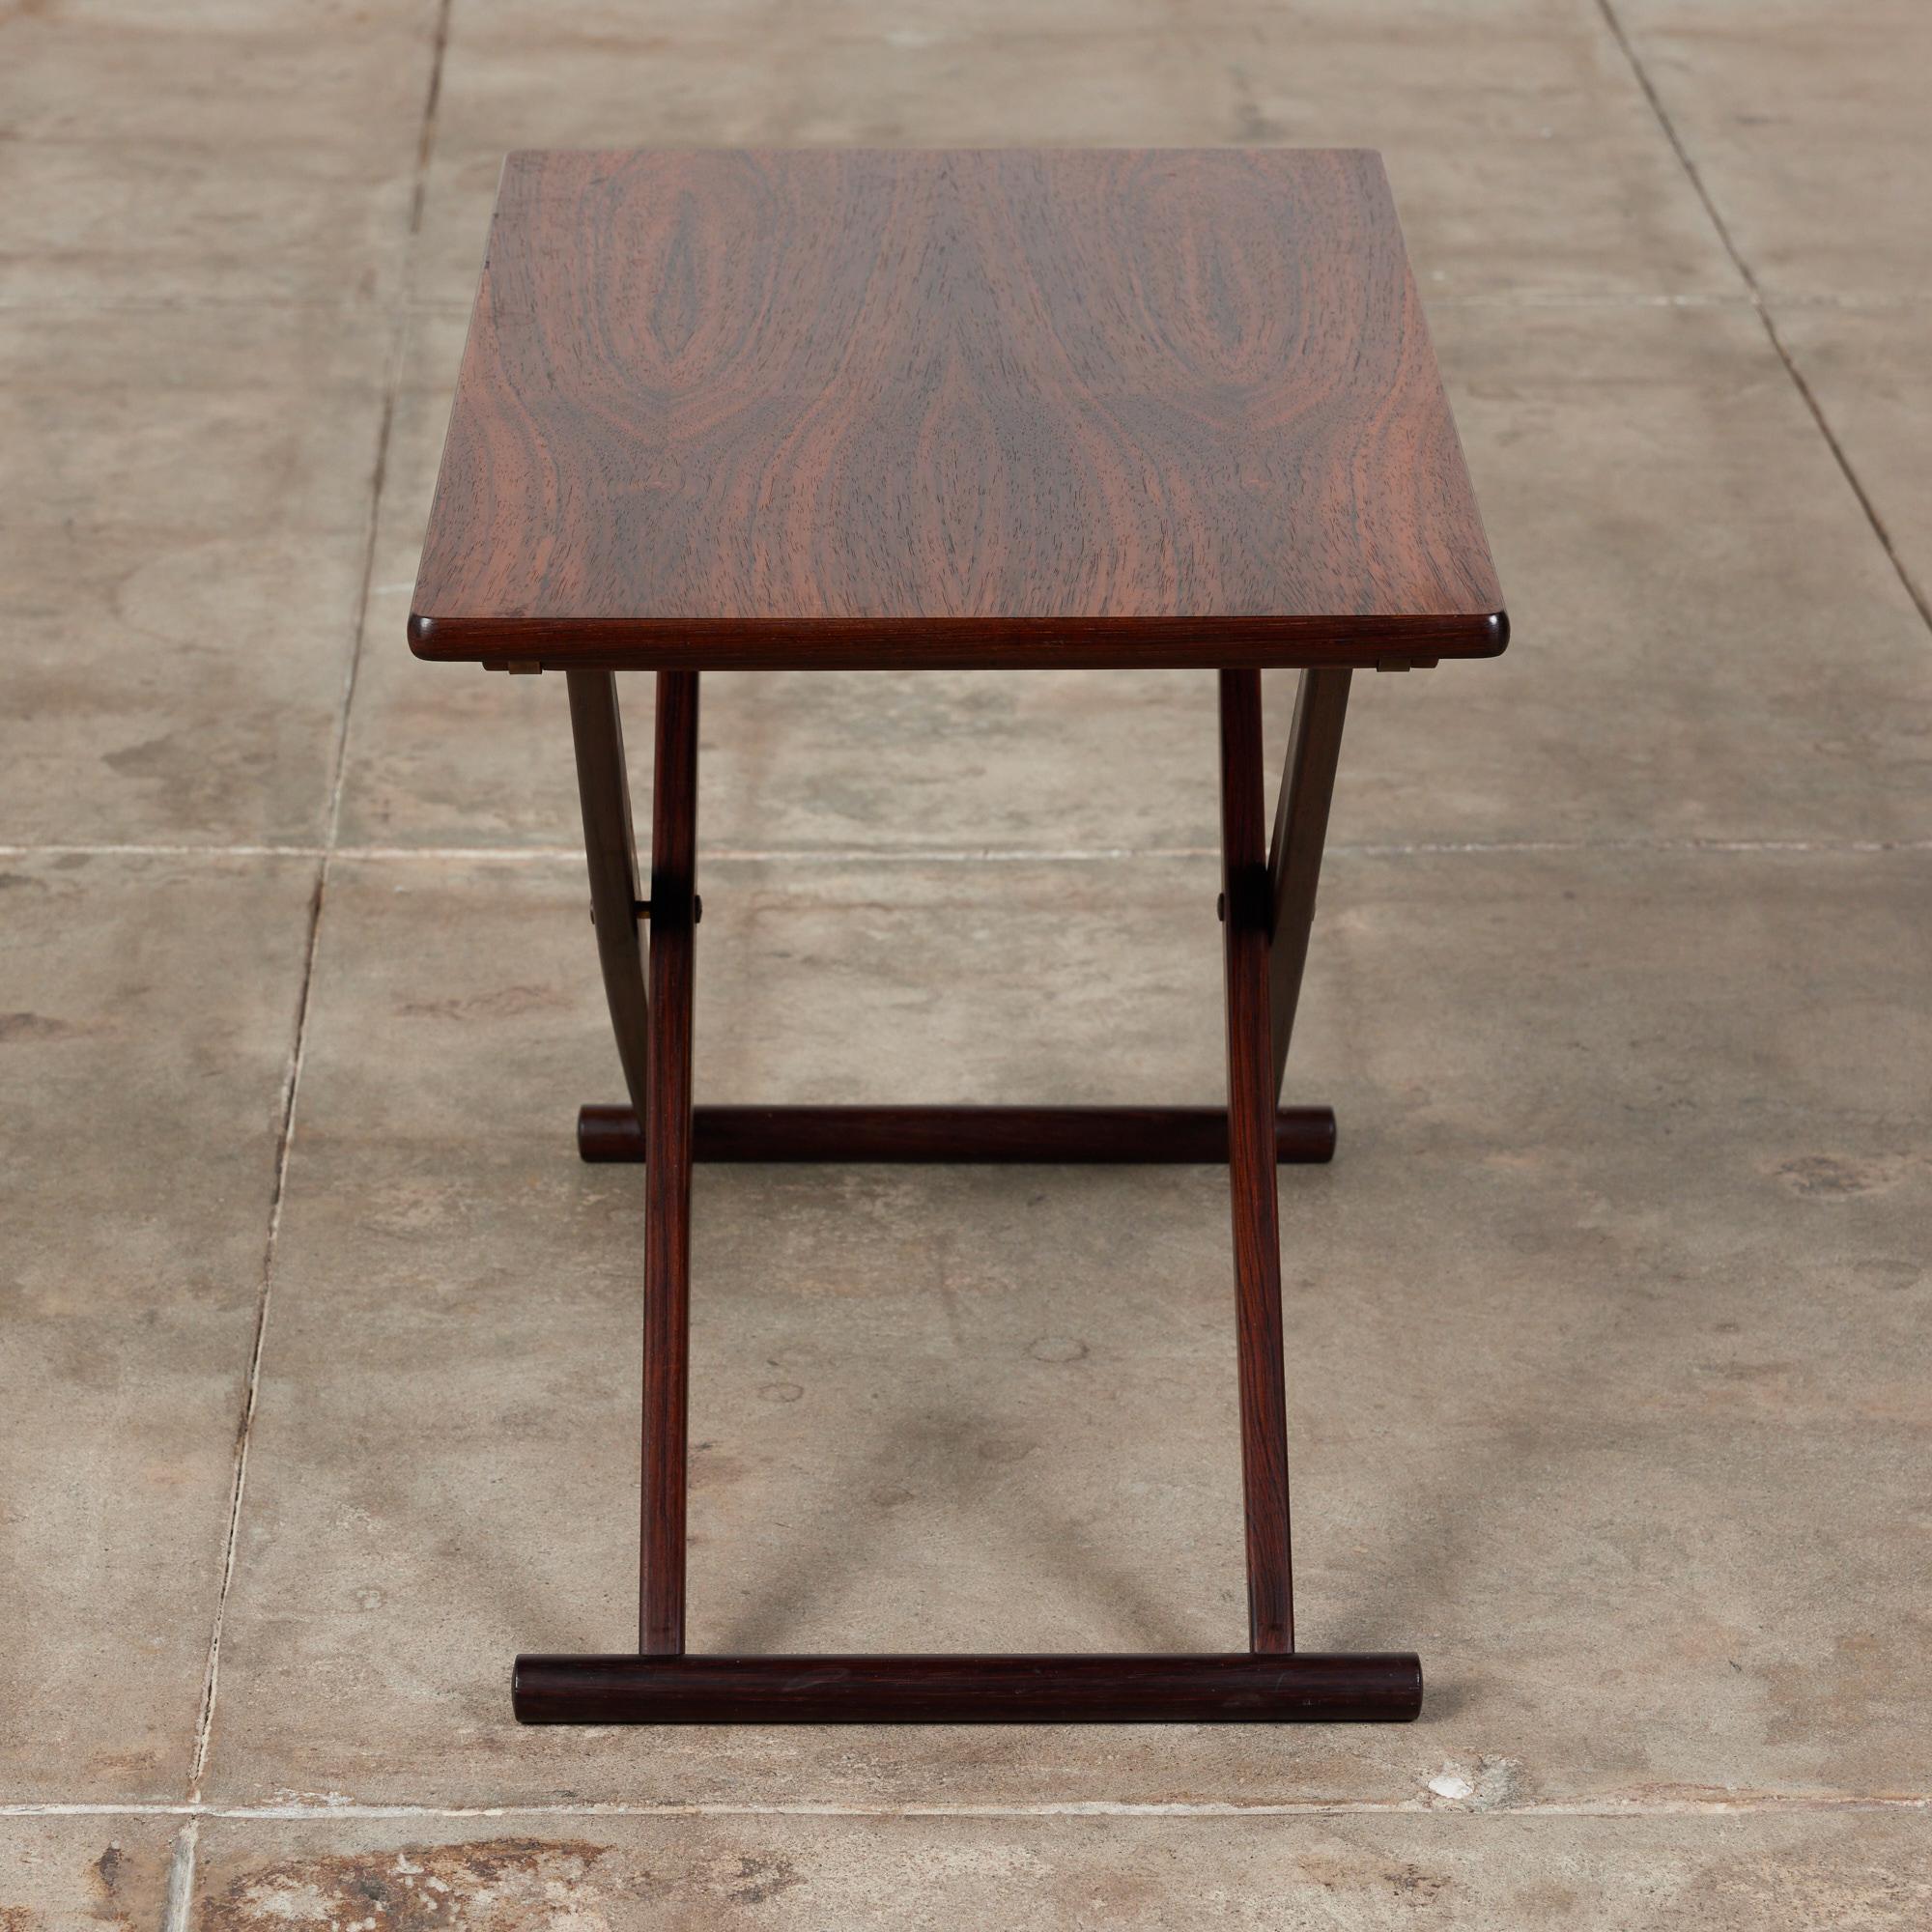 Knud Andersen Rosewood Folding Side Table for Aarhus In Excellent Condition For Sale In Los Angeles, CA